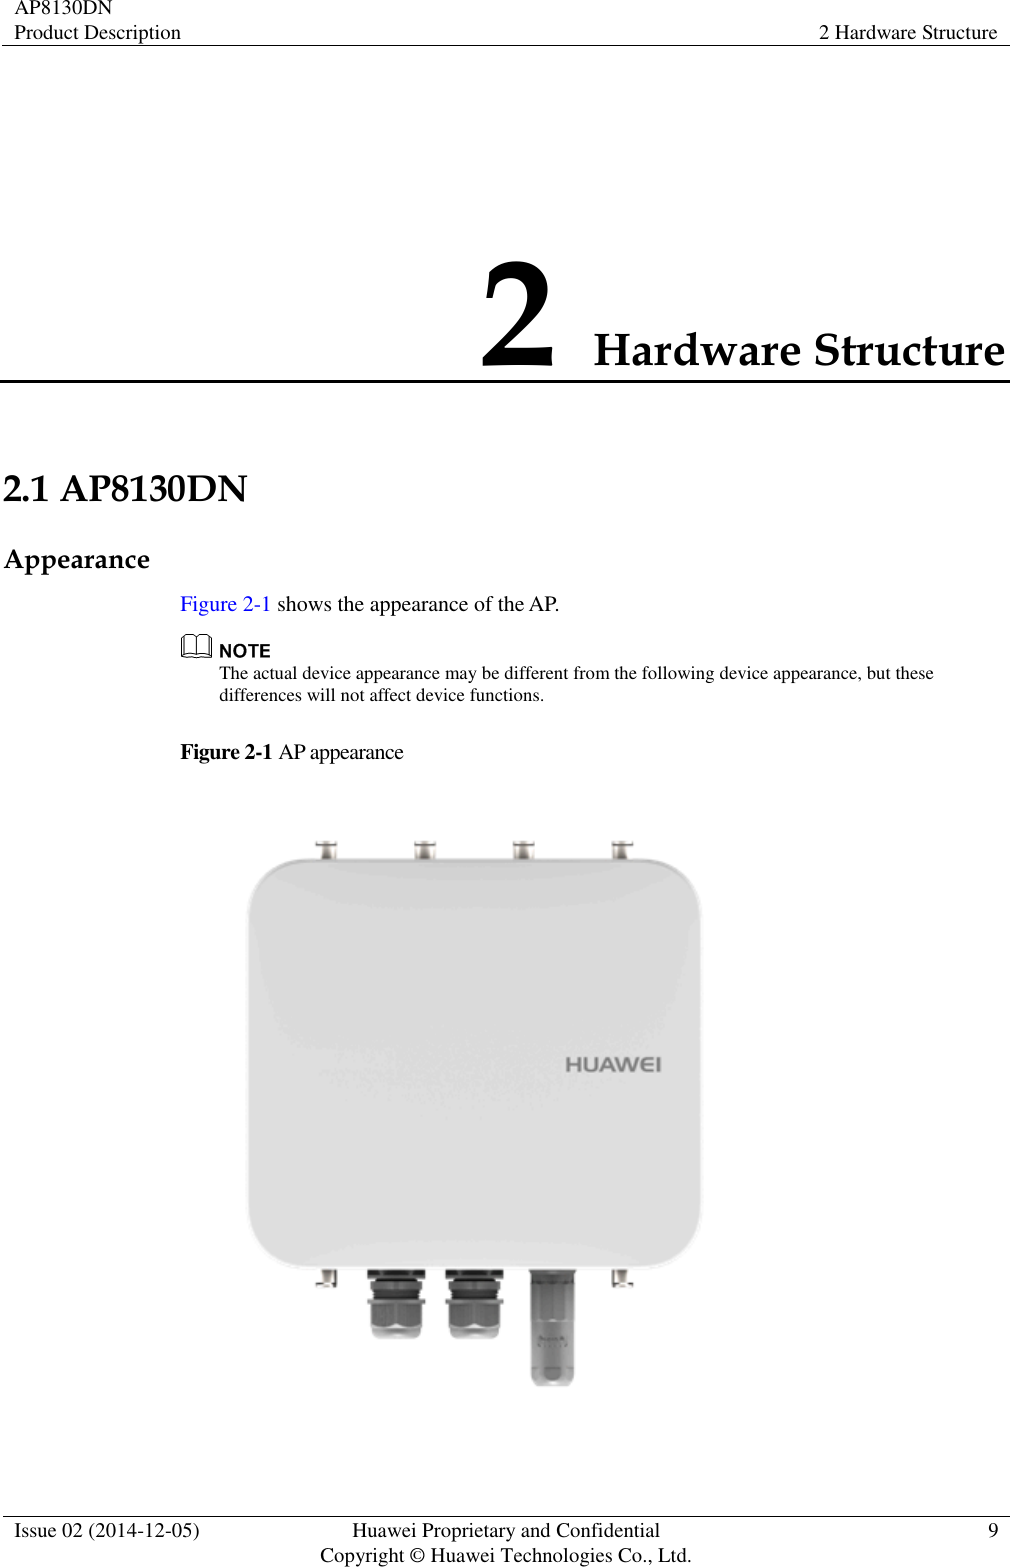 AP8130DN Product Description 2 Hardware Structure  Issue 02 (2014-12-05) Huawei Proprietary and Confidential                                     Copyright © Huawei Technologies Co., Ltd. 9  2 Hardware Structure 2.1 AP8130DN Appearance Figure 2-1 shows the appearance of the AP.  The actual device appearance may be different from the following device appearance, but these differences will not affect device functions. Figure 2-1 AP appearance  